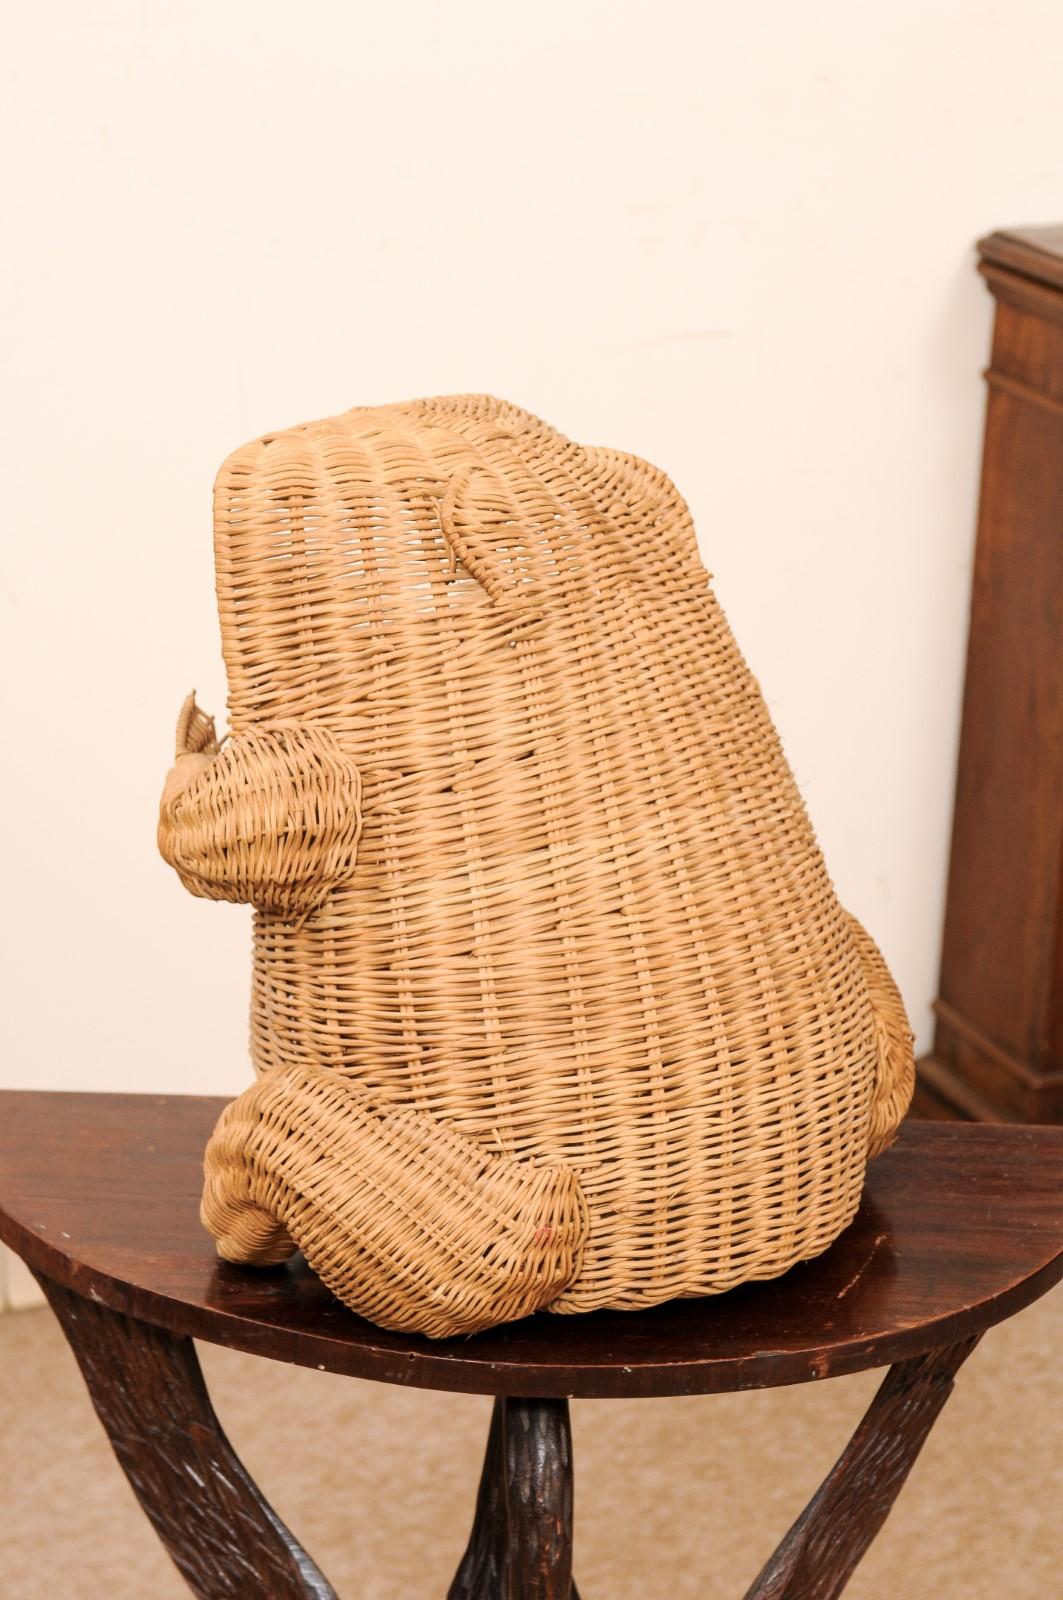 20th Century Whimsical Italian Wicker Frog Basket For Sale 3